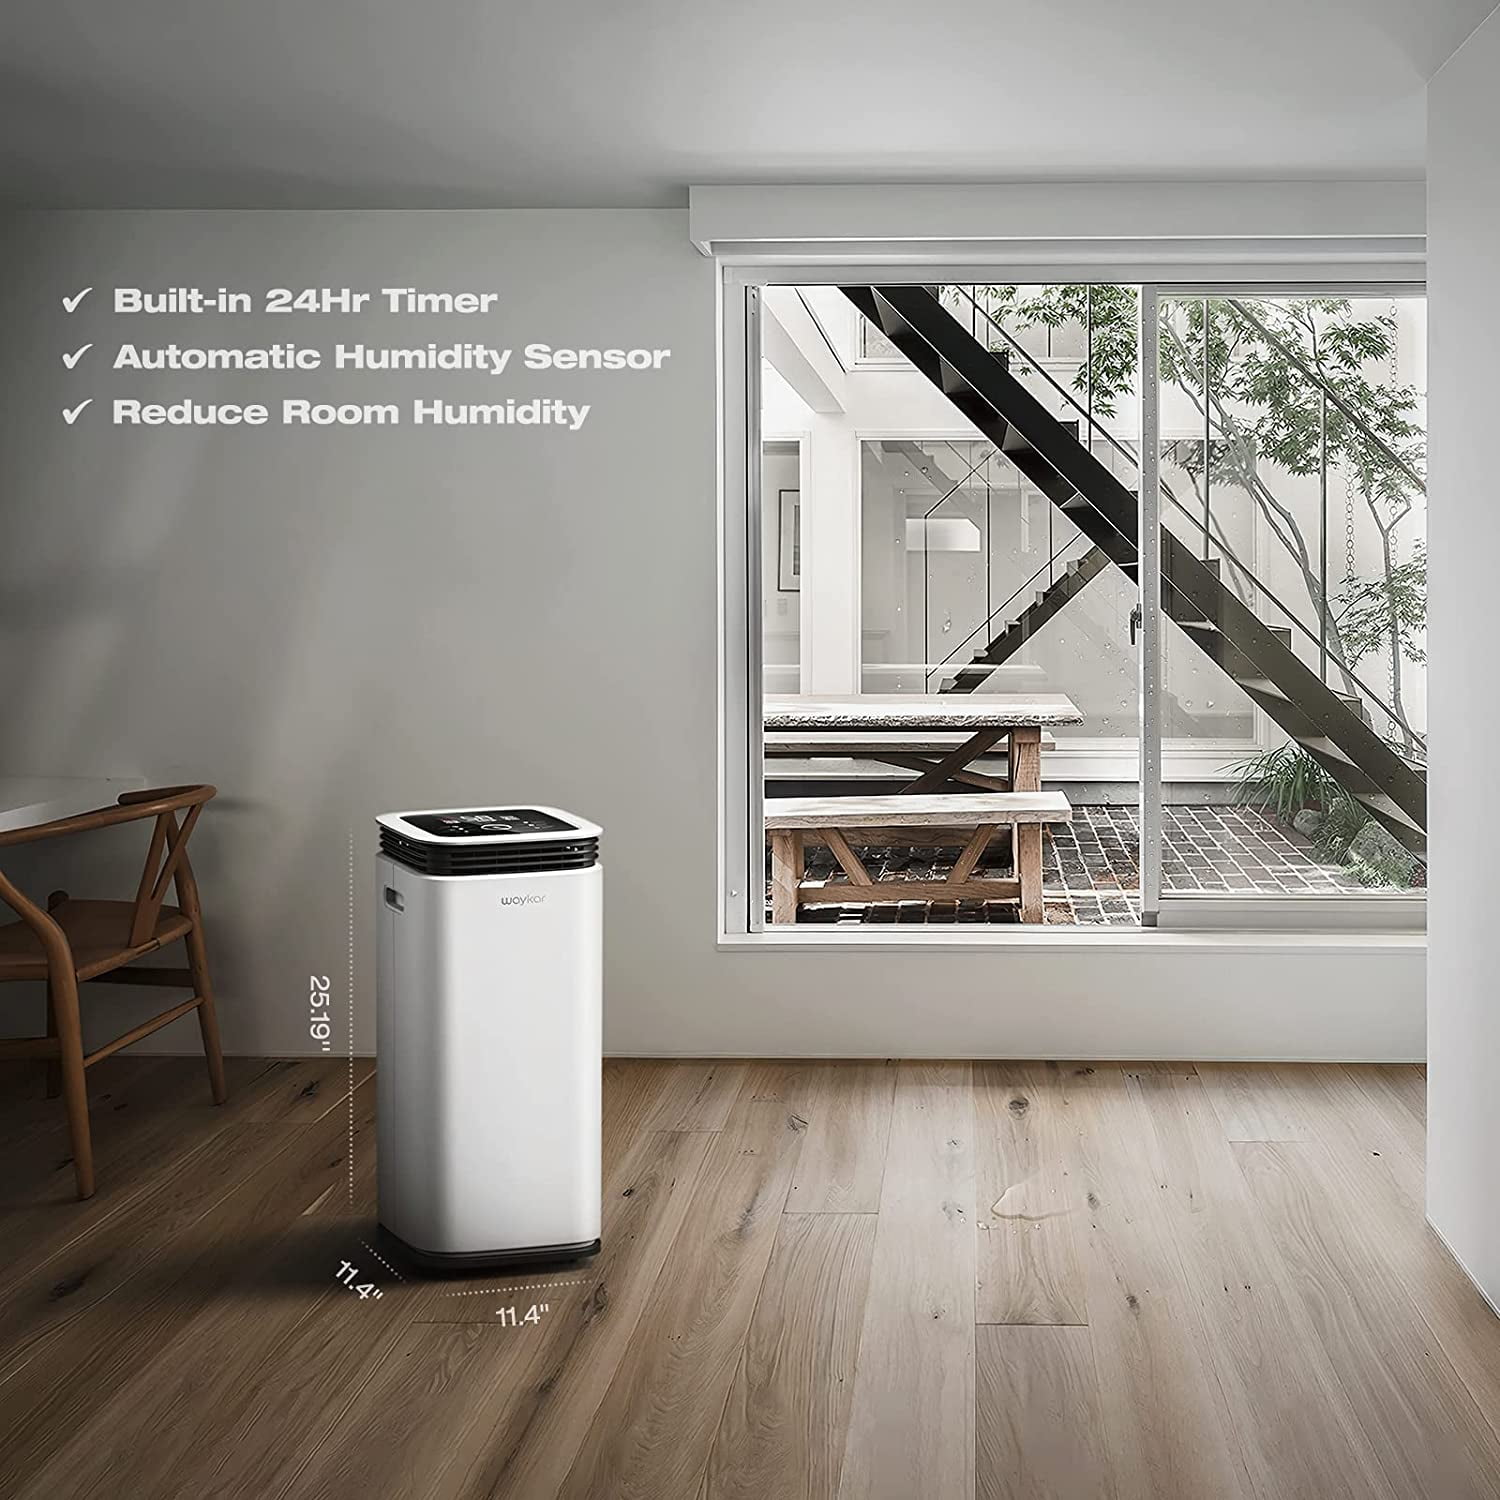 Ft Dehumidifier for Home Basements Bedroom Garage for 4500 Sq Details about   Waykar 70 Pints 